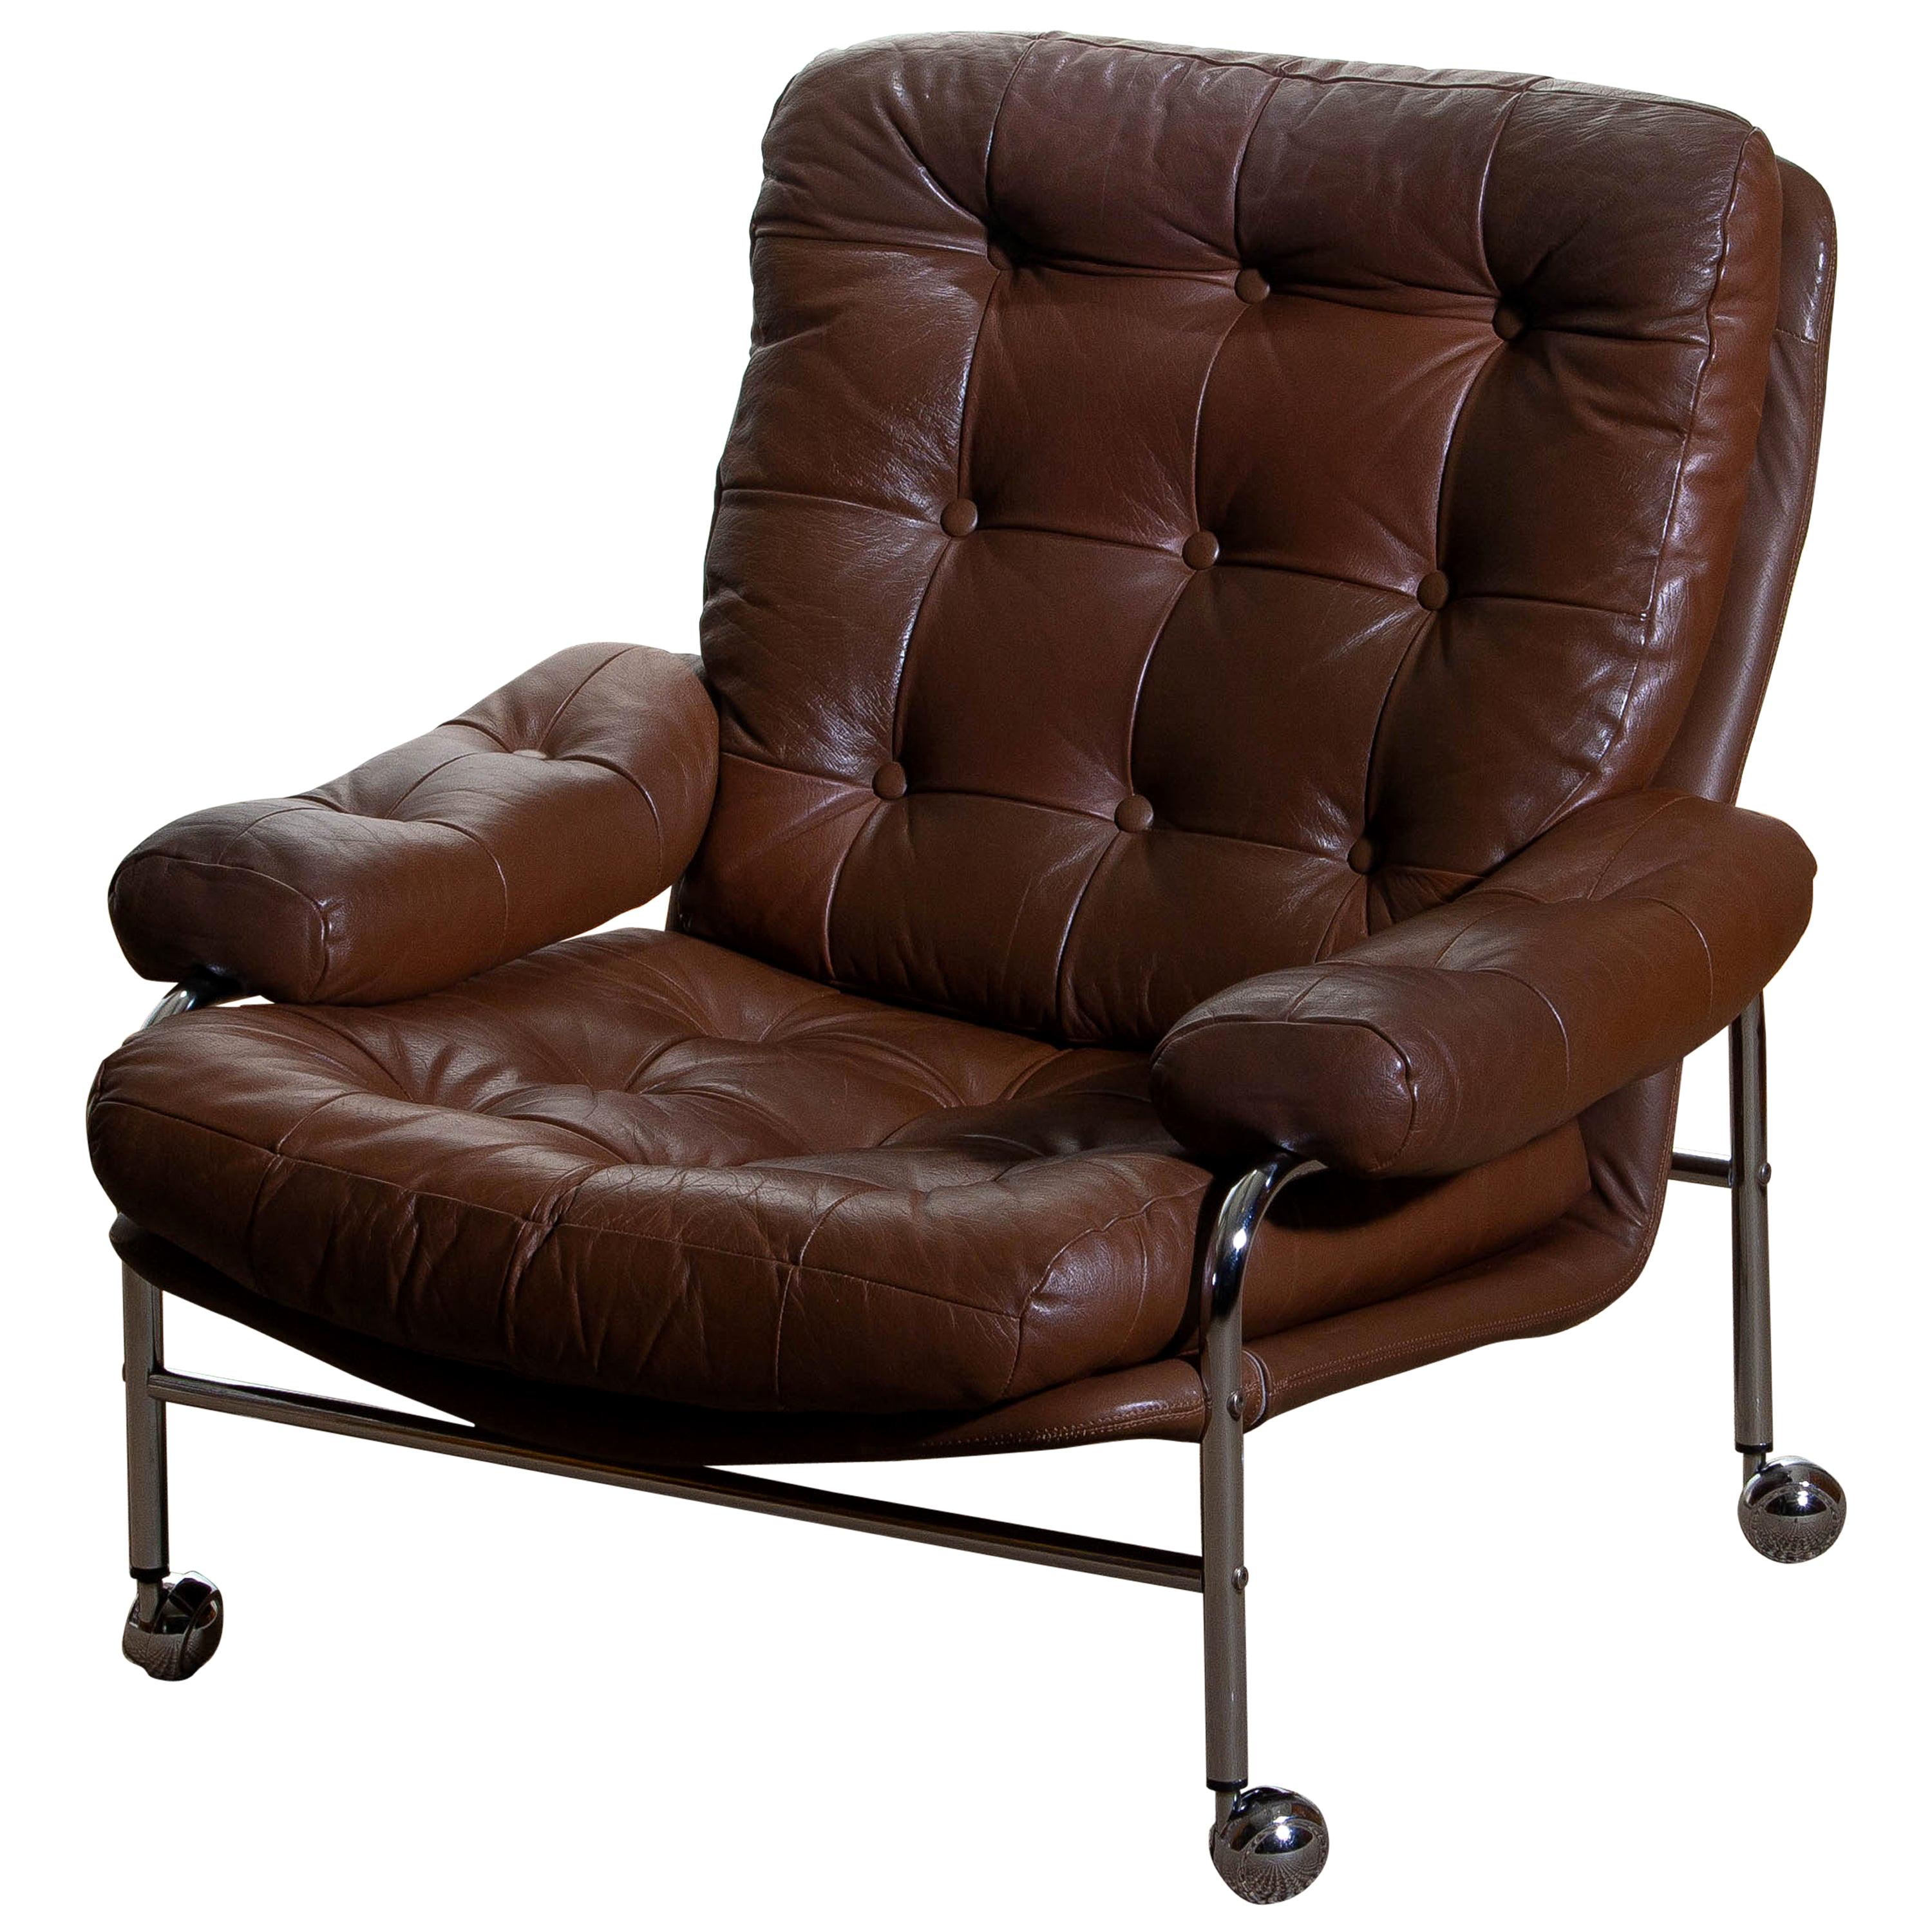 1 Chrome and Brown Leather Easy or Lounge Chair by Scapa Rydaholm, Sweden, 1970s